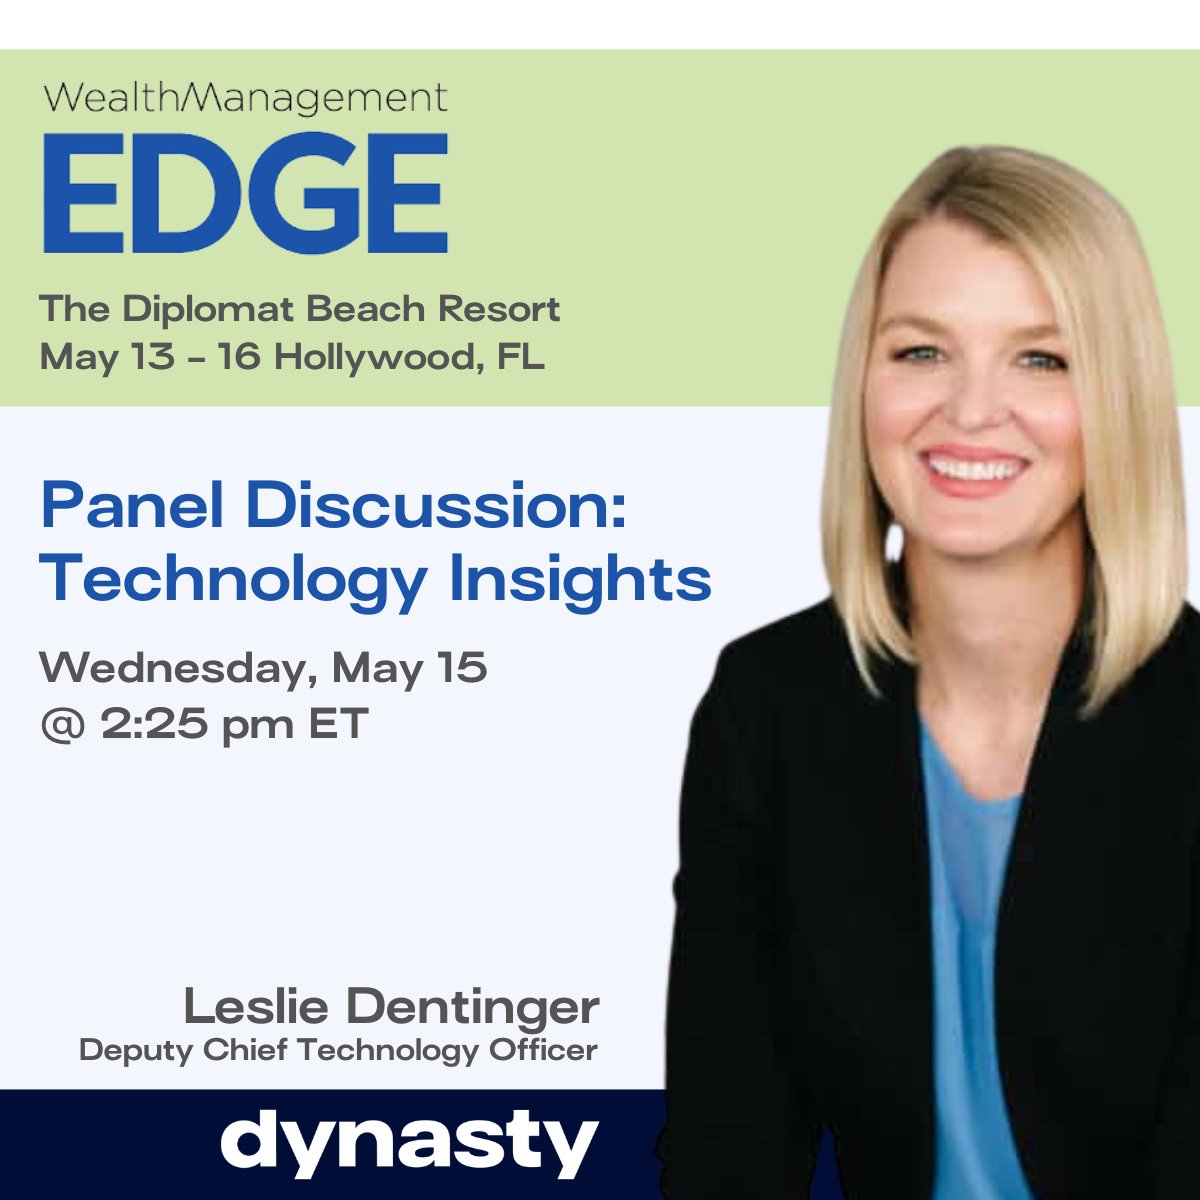 We are excited to share that Leslie Dentinger, Dynasty Deputy Chief Technology Officer, will be a featured panel speaker at this year's @wealth_mgmt Edge. Leslie will join other industry leaders to discuss 'How CTOs are Leading the Digitial Charge at Buy-Side Firms'. #WMEDGE